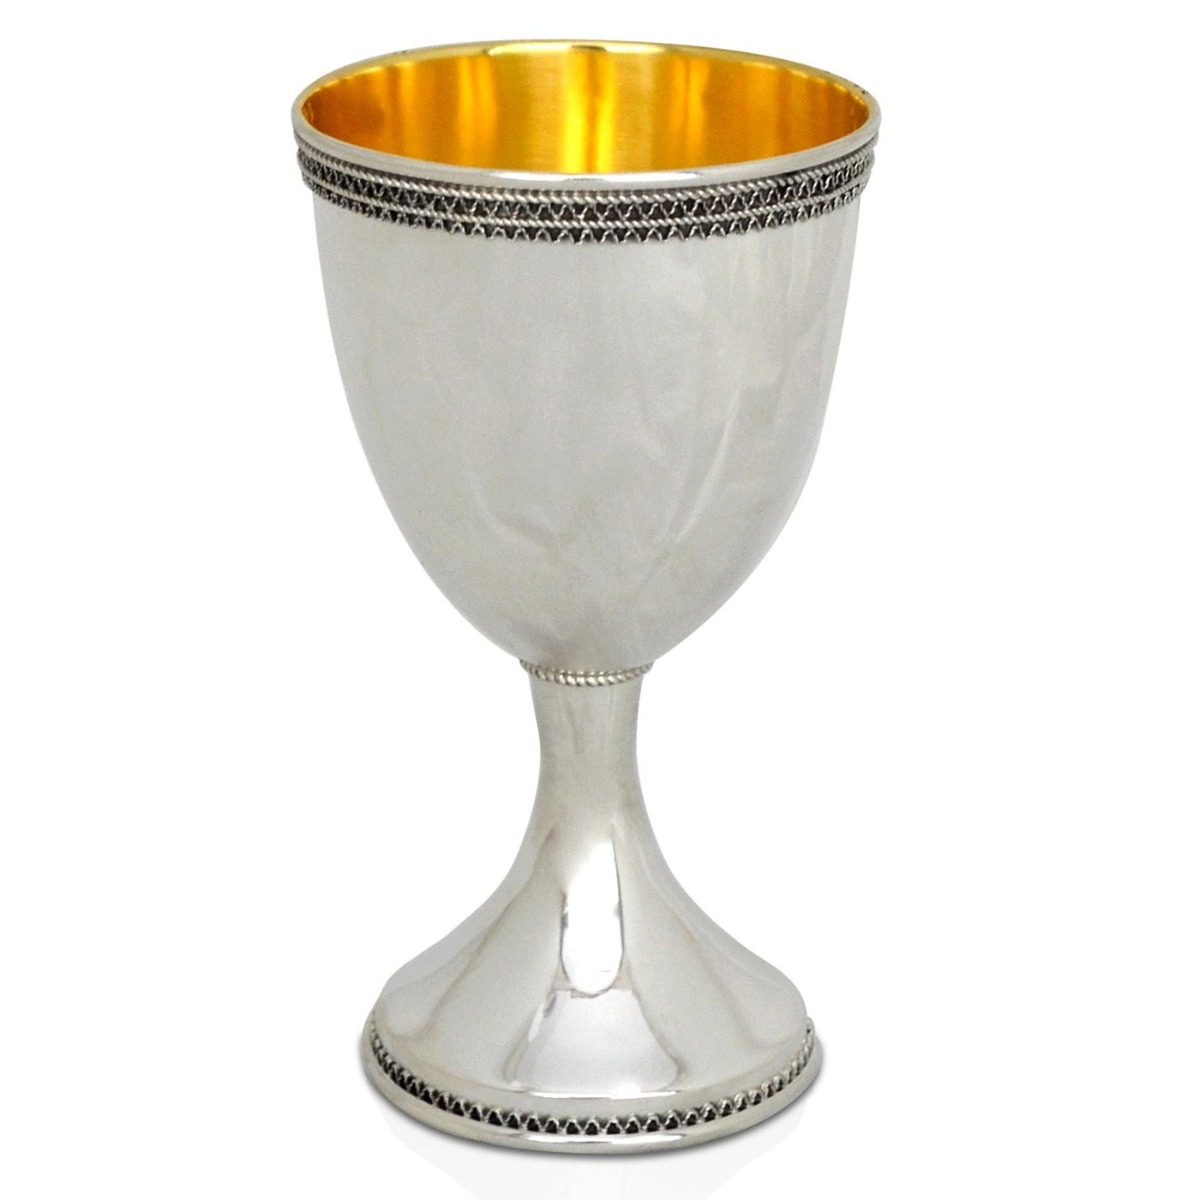 Sterling Silver Kiddush Cup with Filigree Design - 1